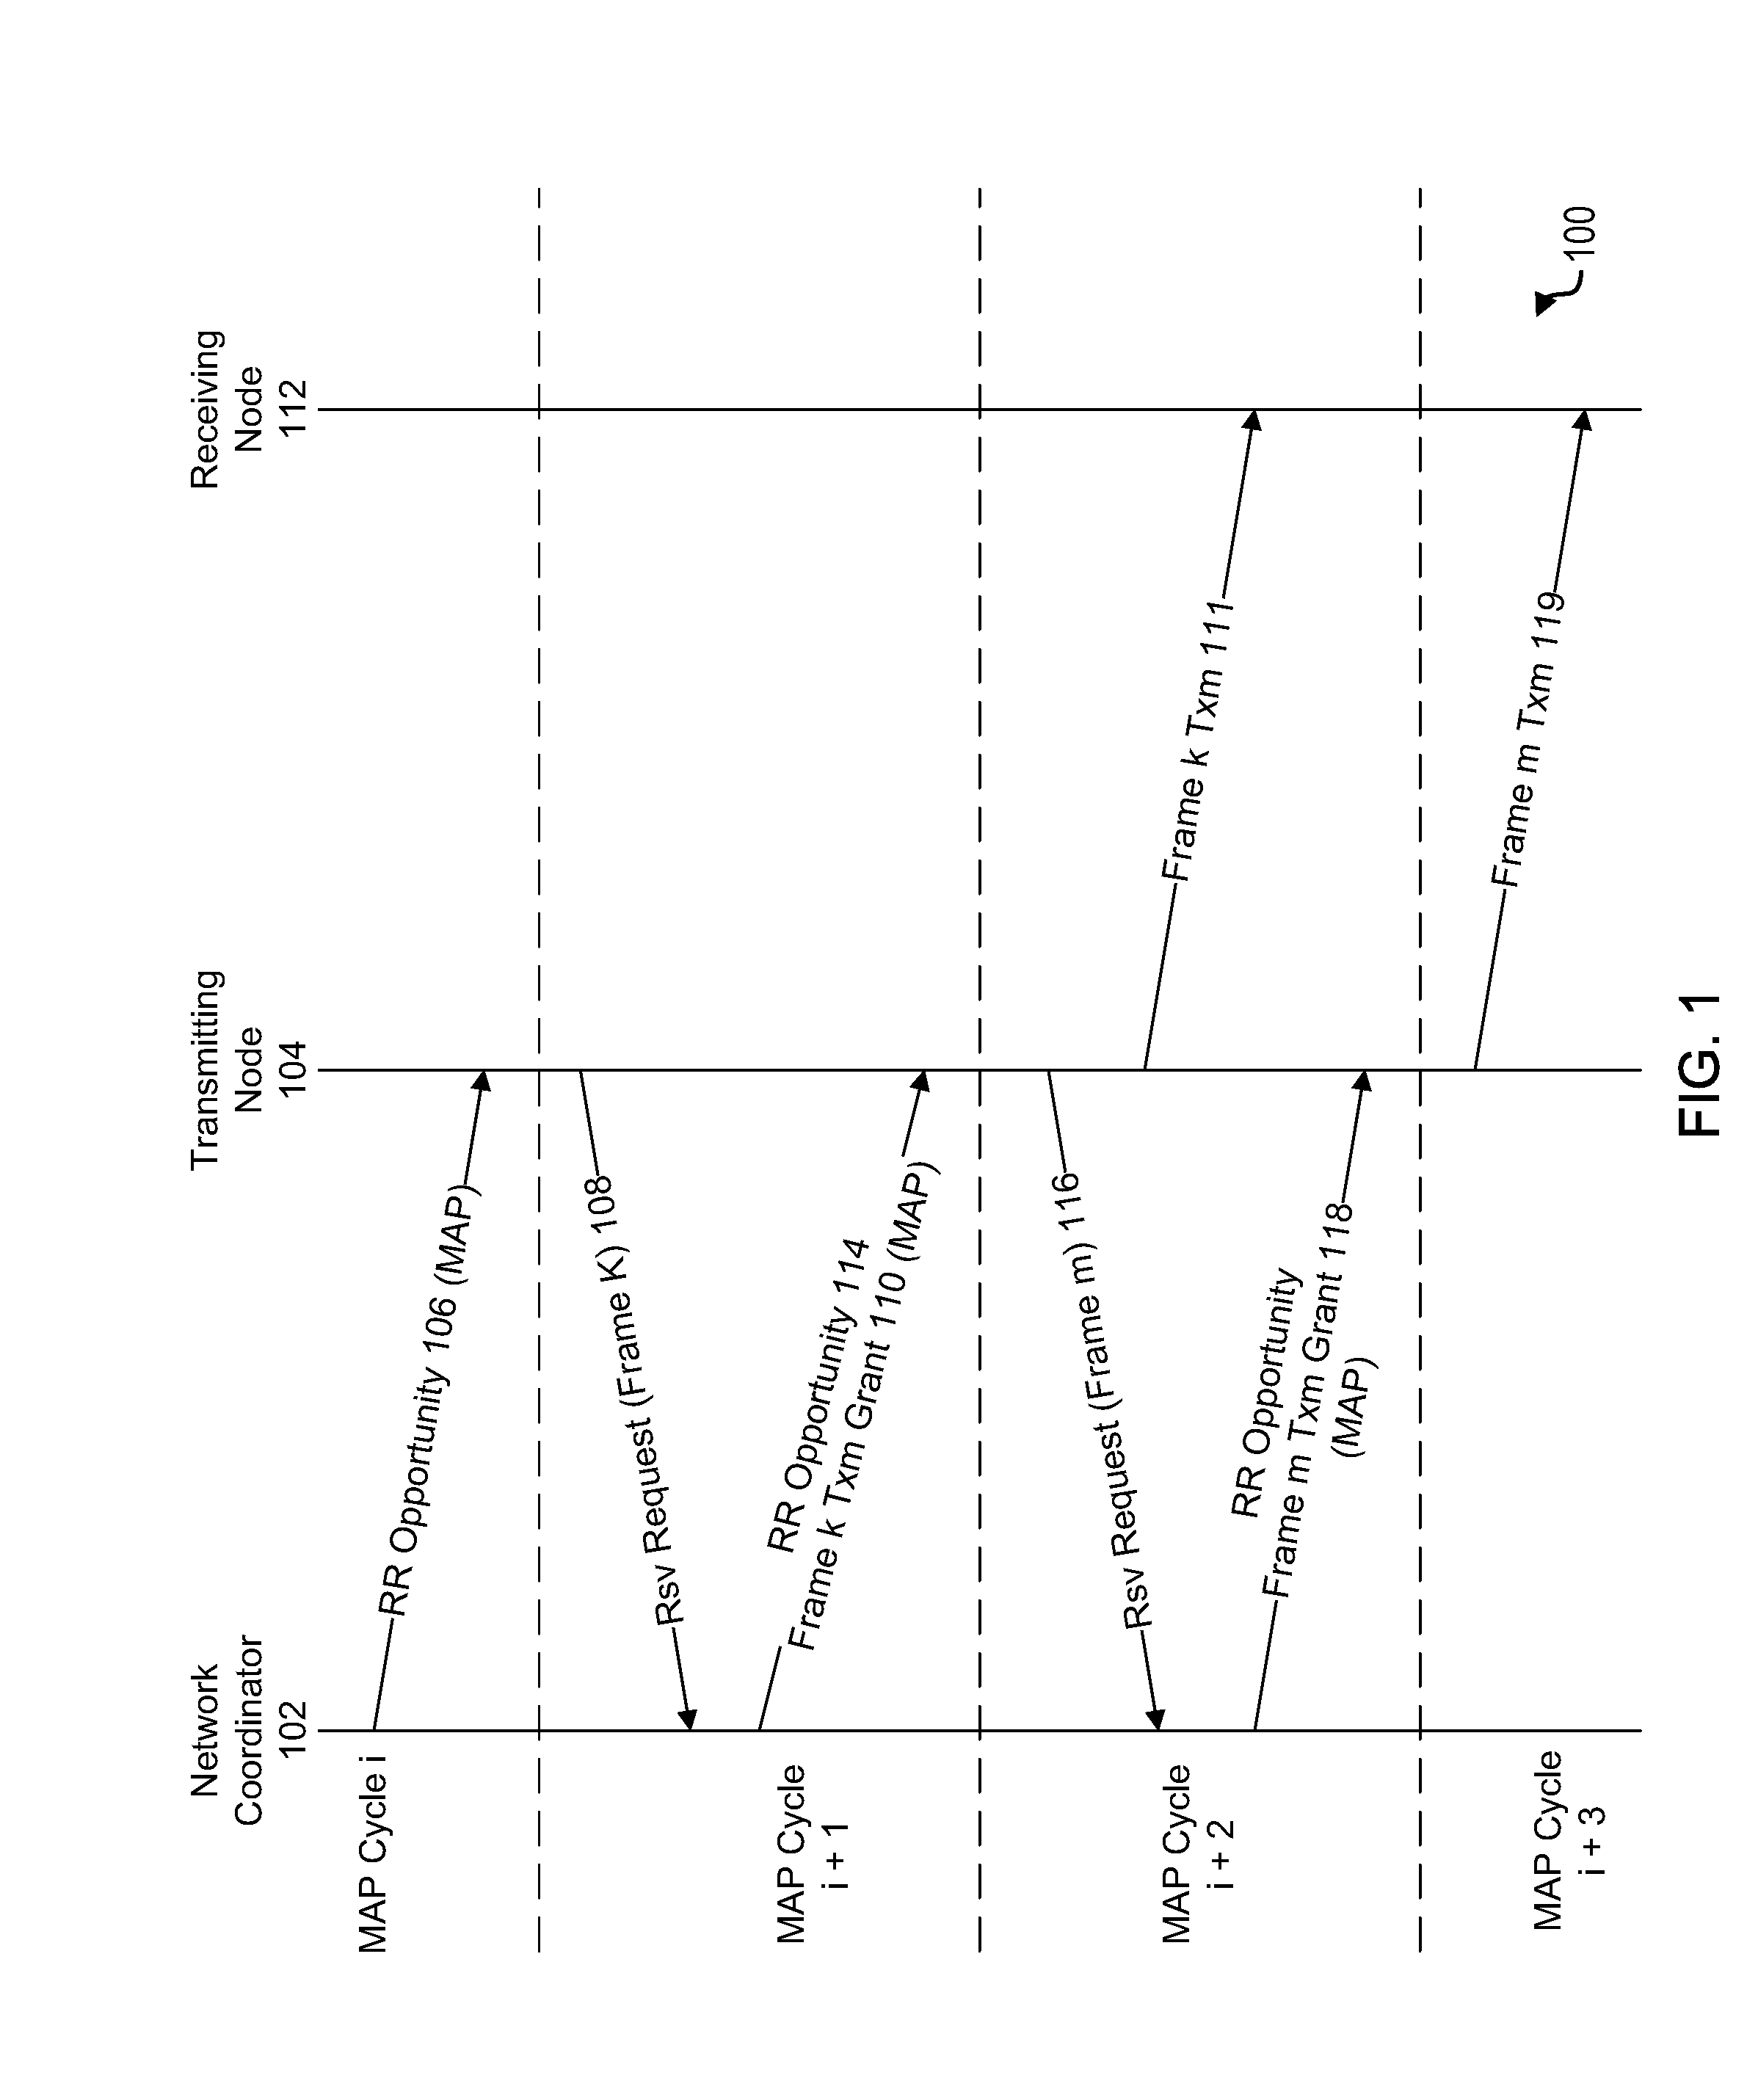 Apparatus and methods for reduction of transmission delay in a communication network